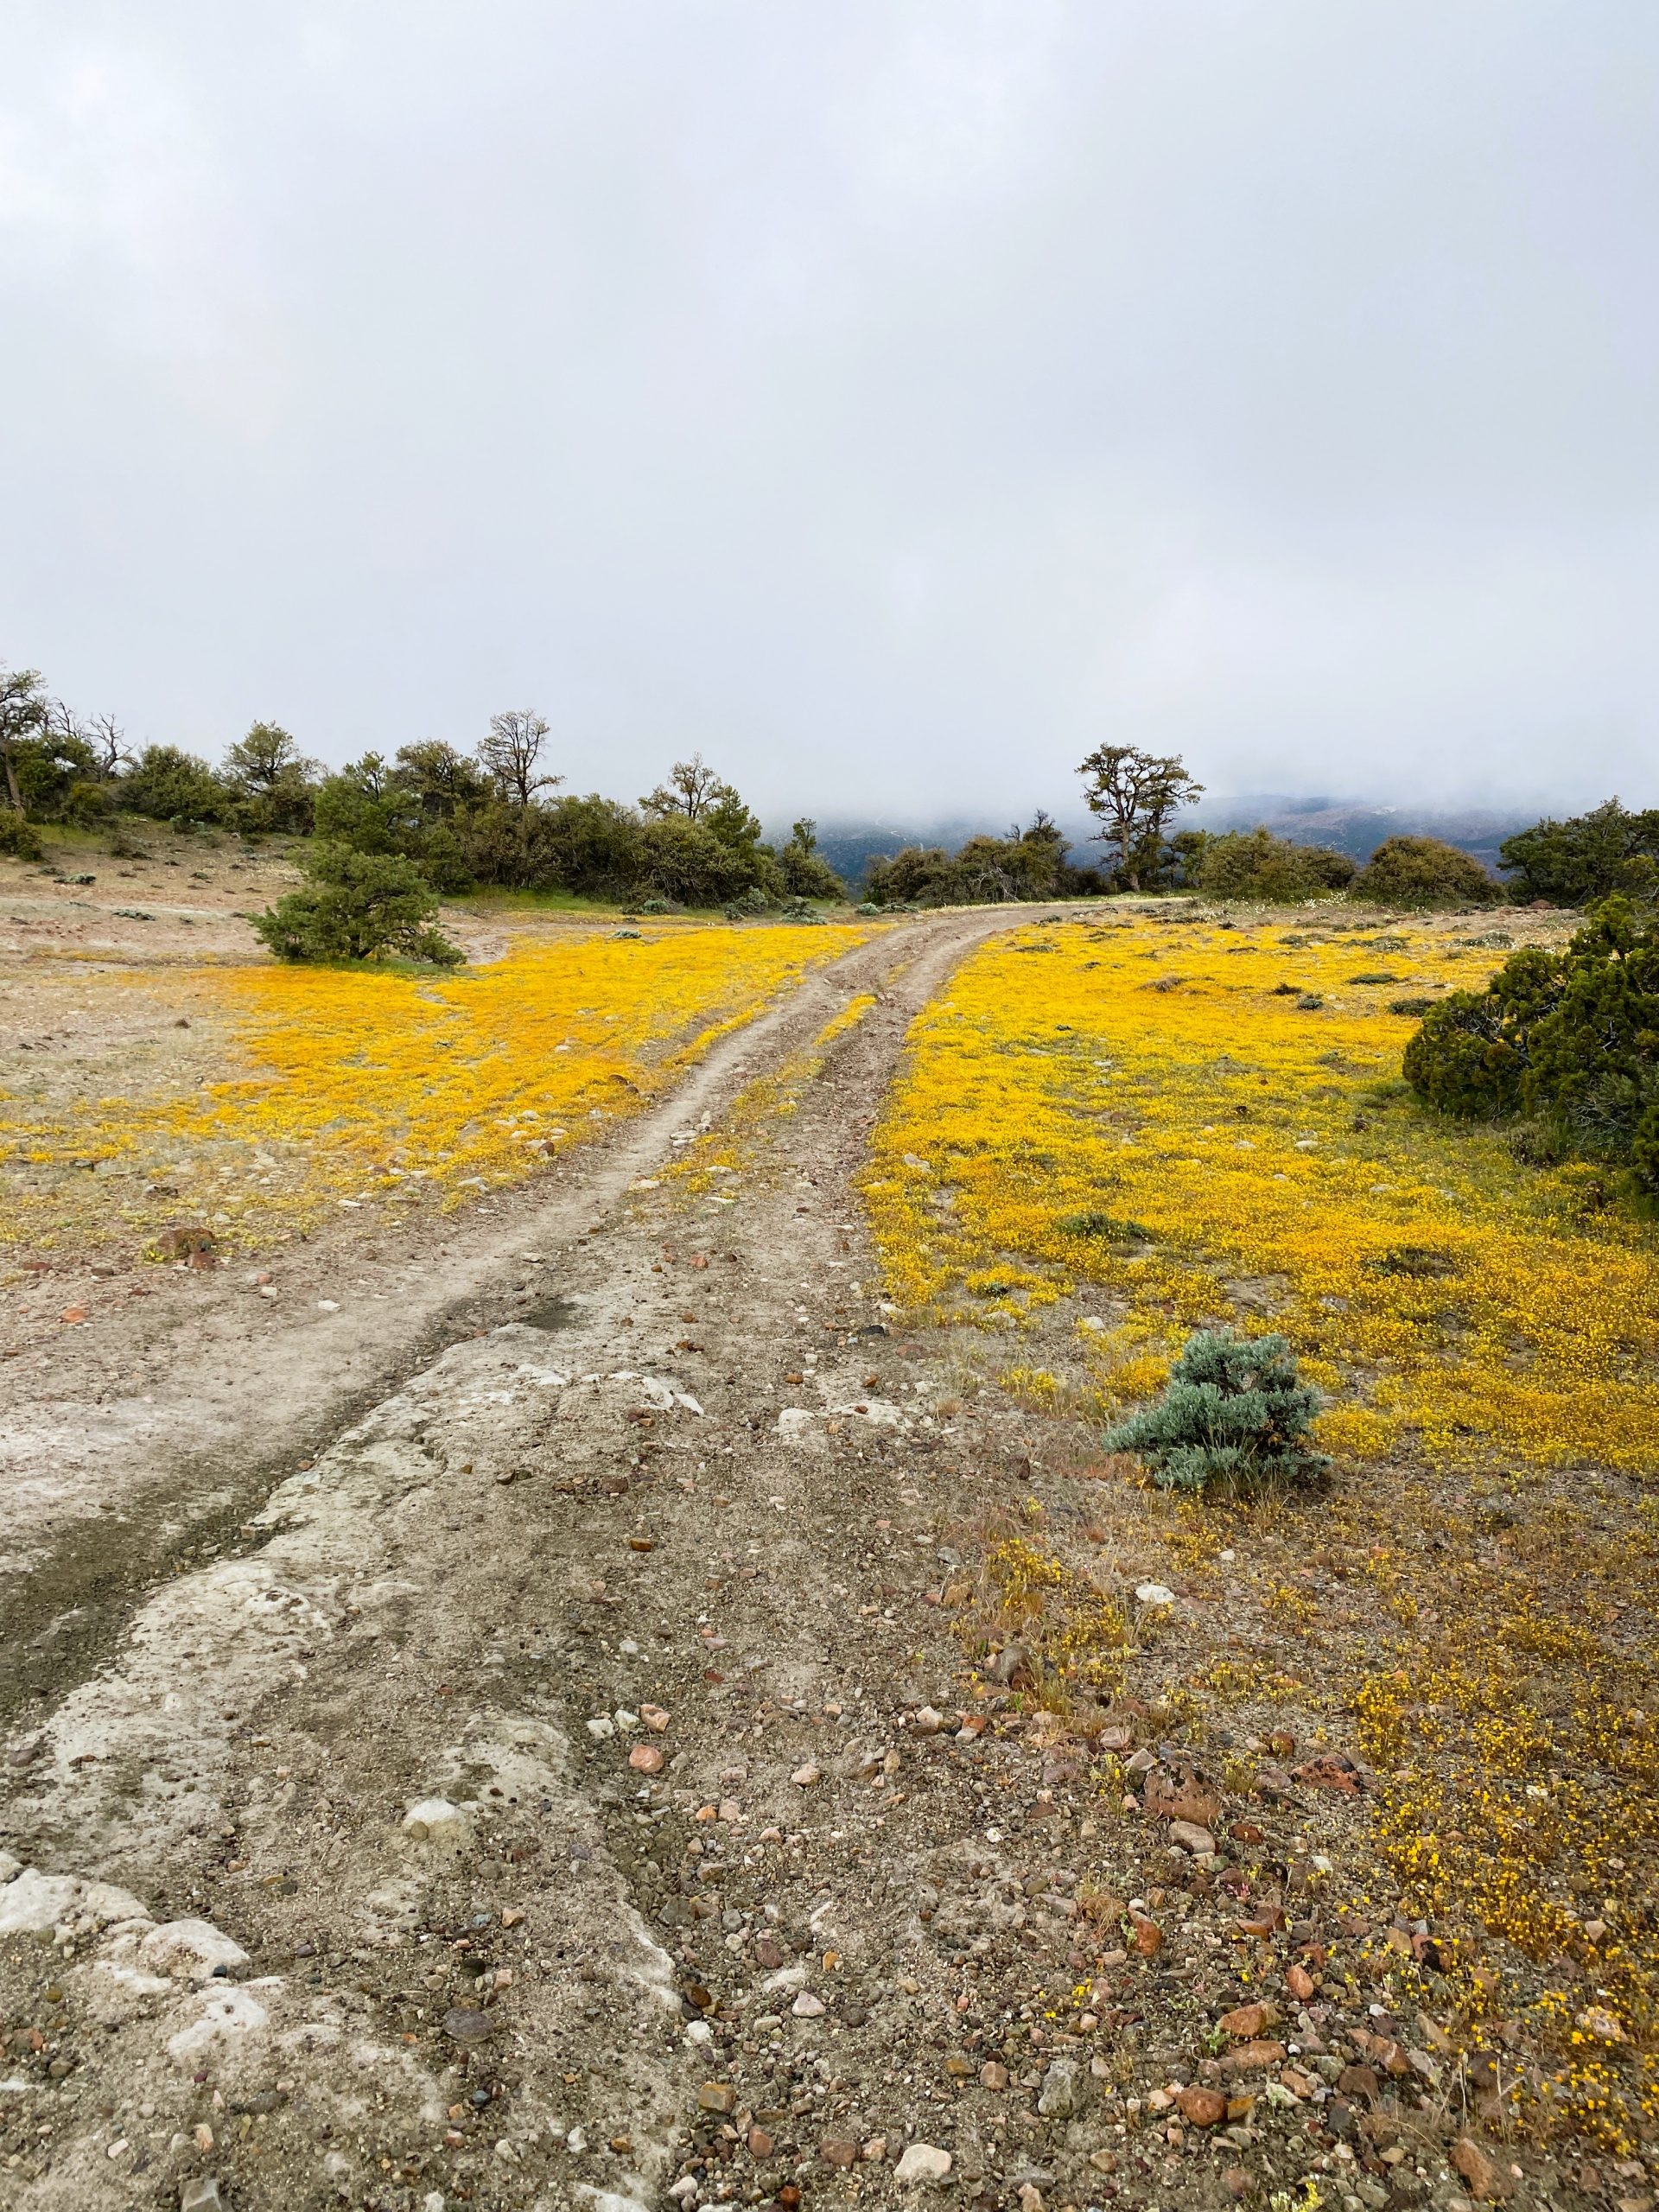  PCT Trail Journal: Day 23 Mile 597.3 to 578.1 wildflowers